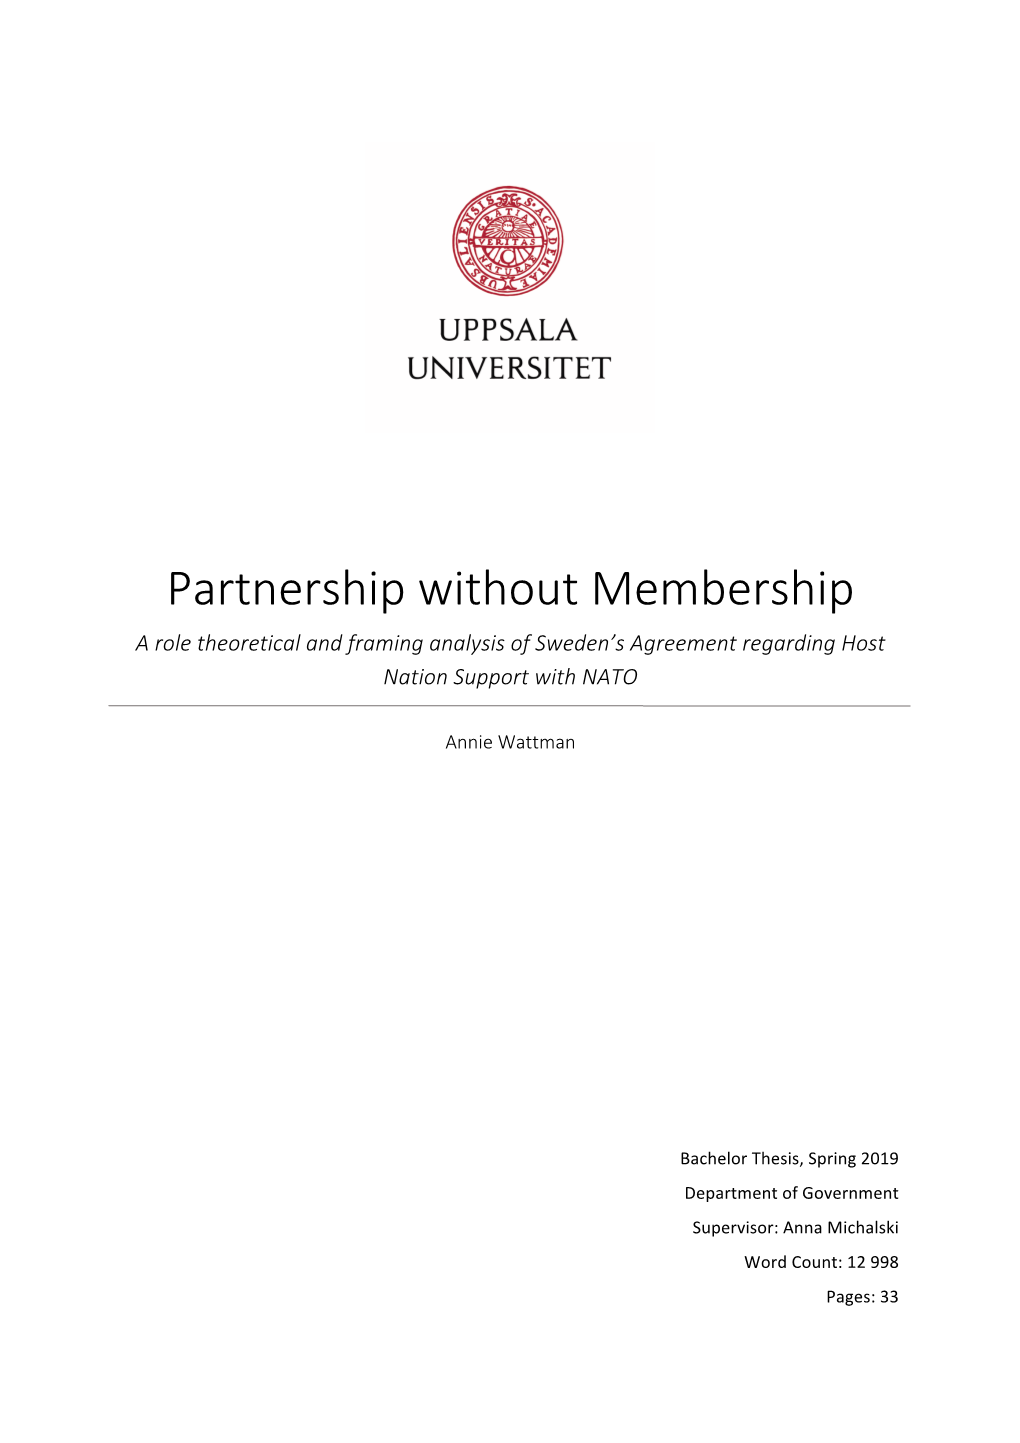 Partnership Without Membership a Role Theoretical and Framing Analysis of Sweden’S Agreement Regarding Host Nation Support with NATO